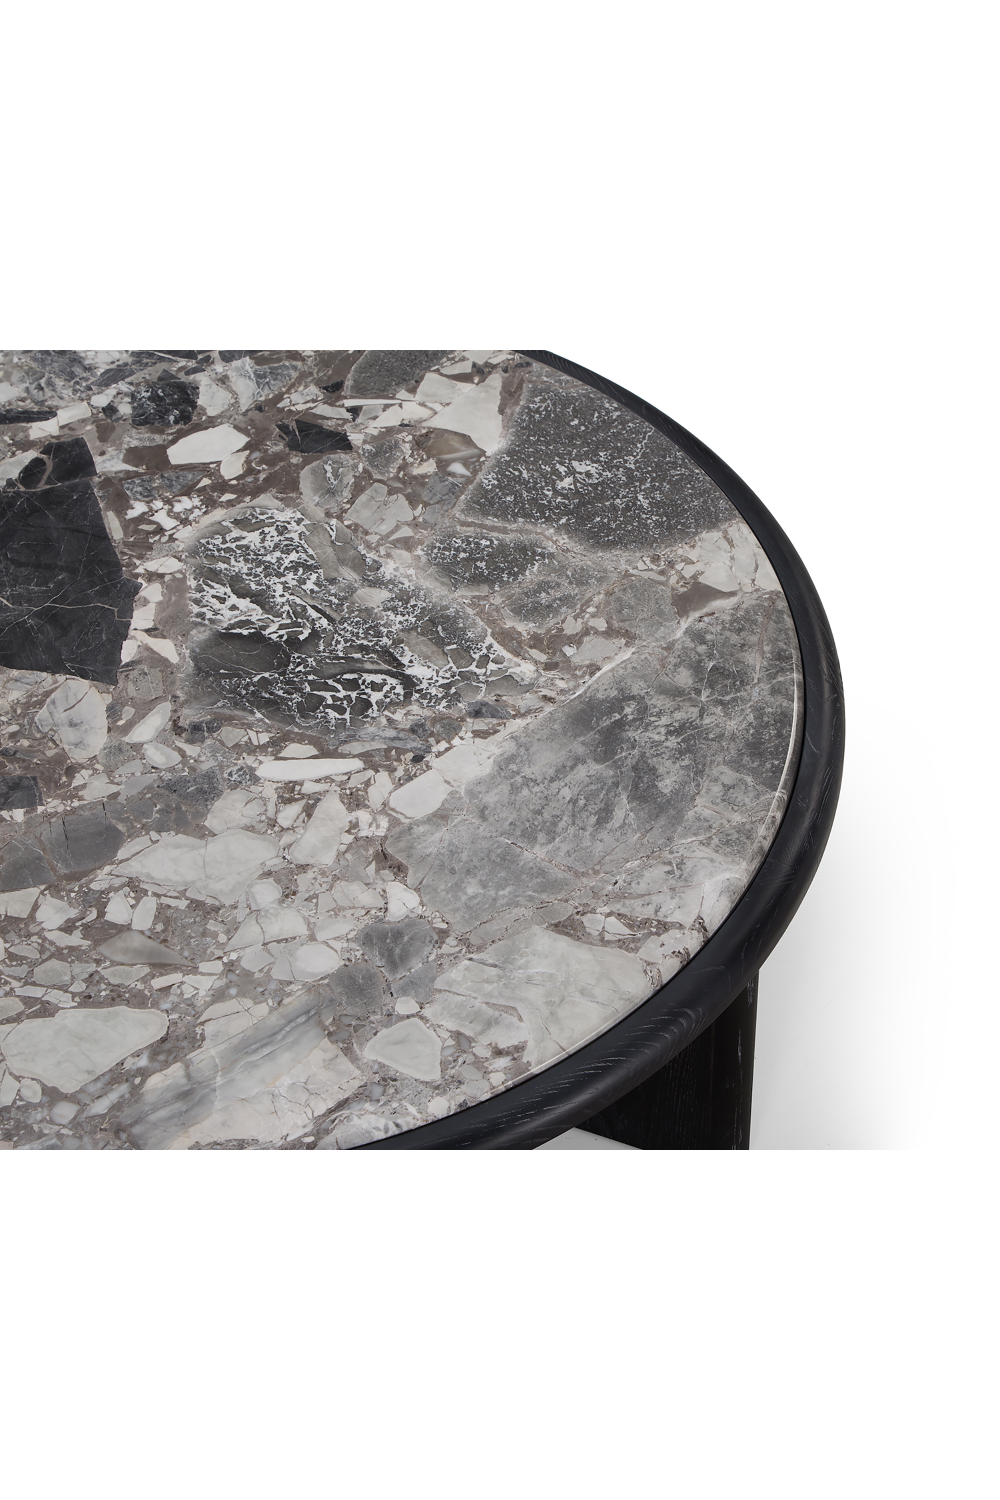 Gray Marble Round Coffee Table | Liang & Eimil Herman | Oroa.com